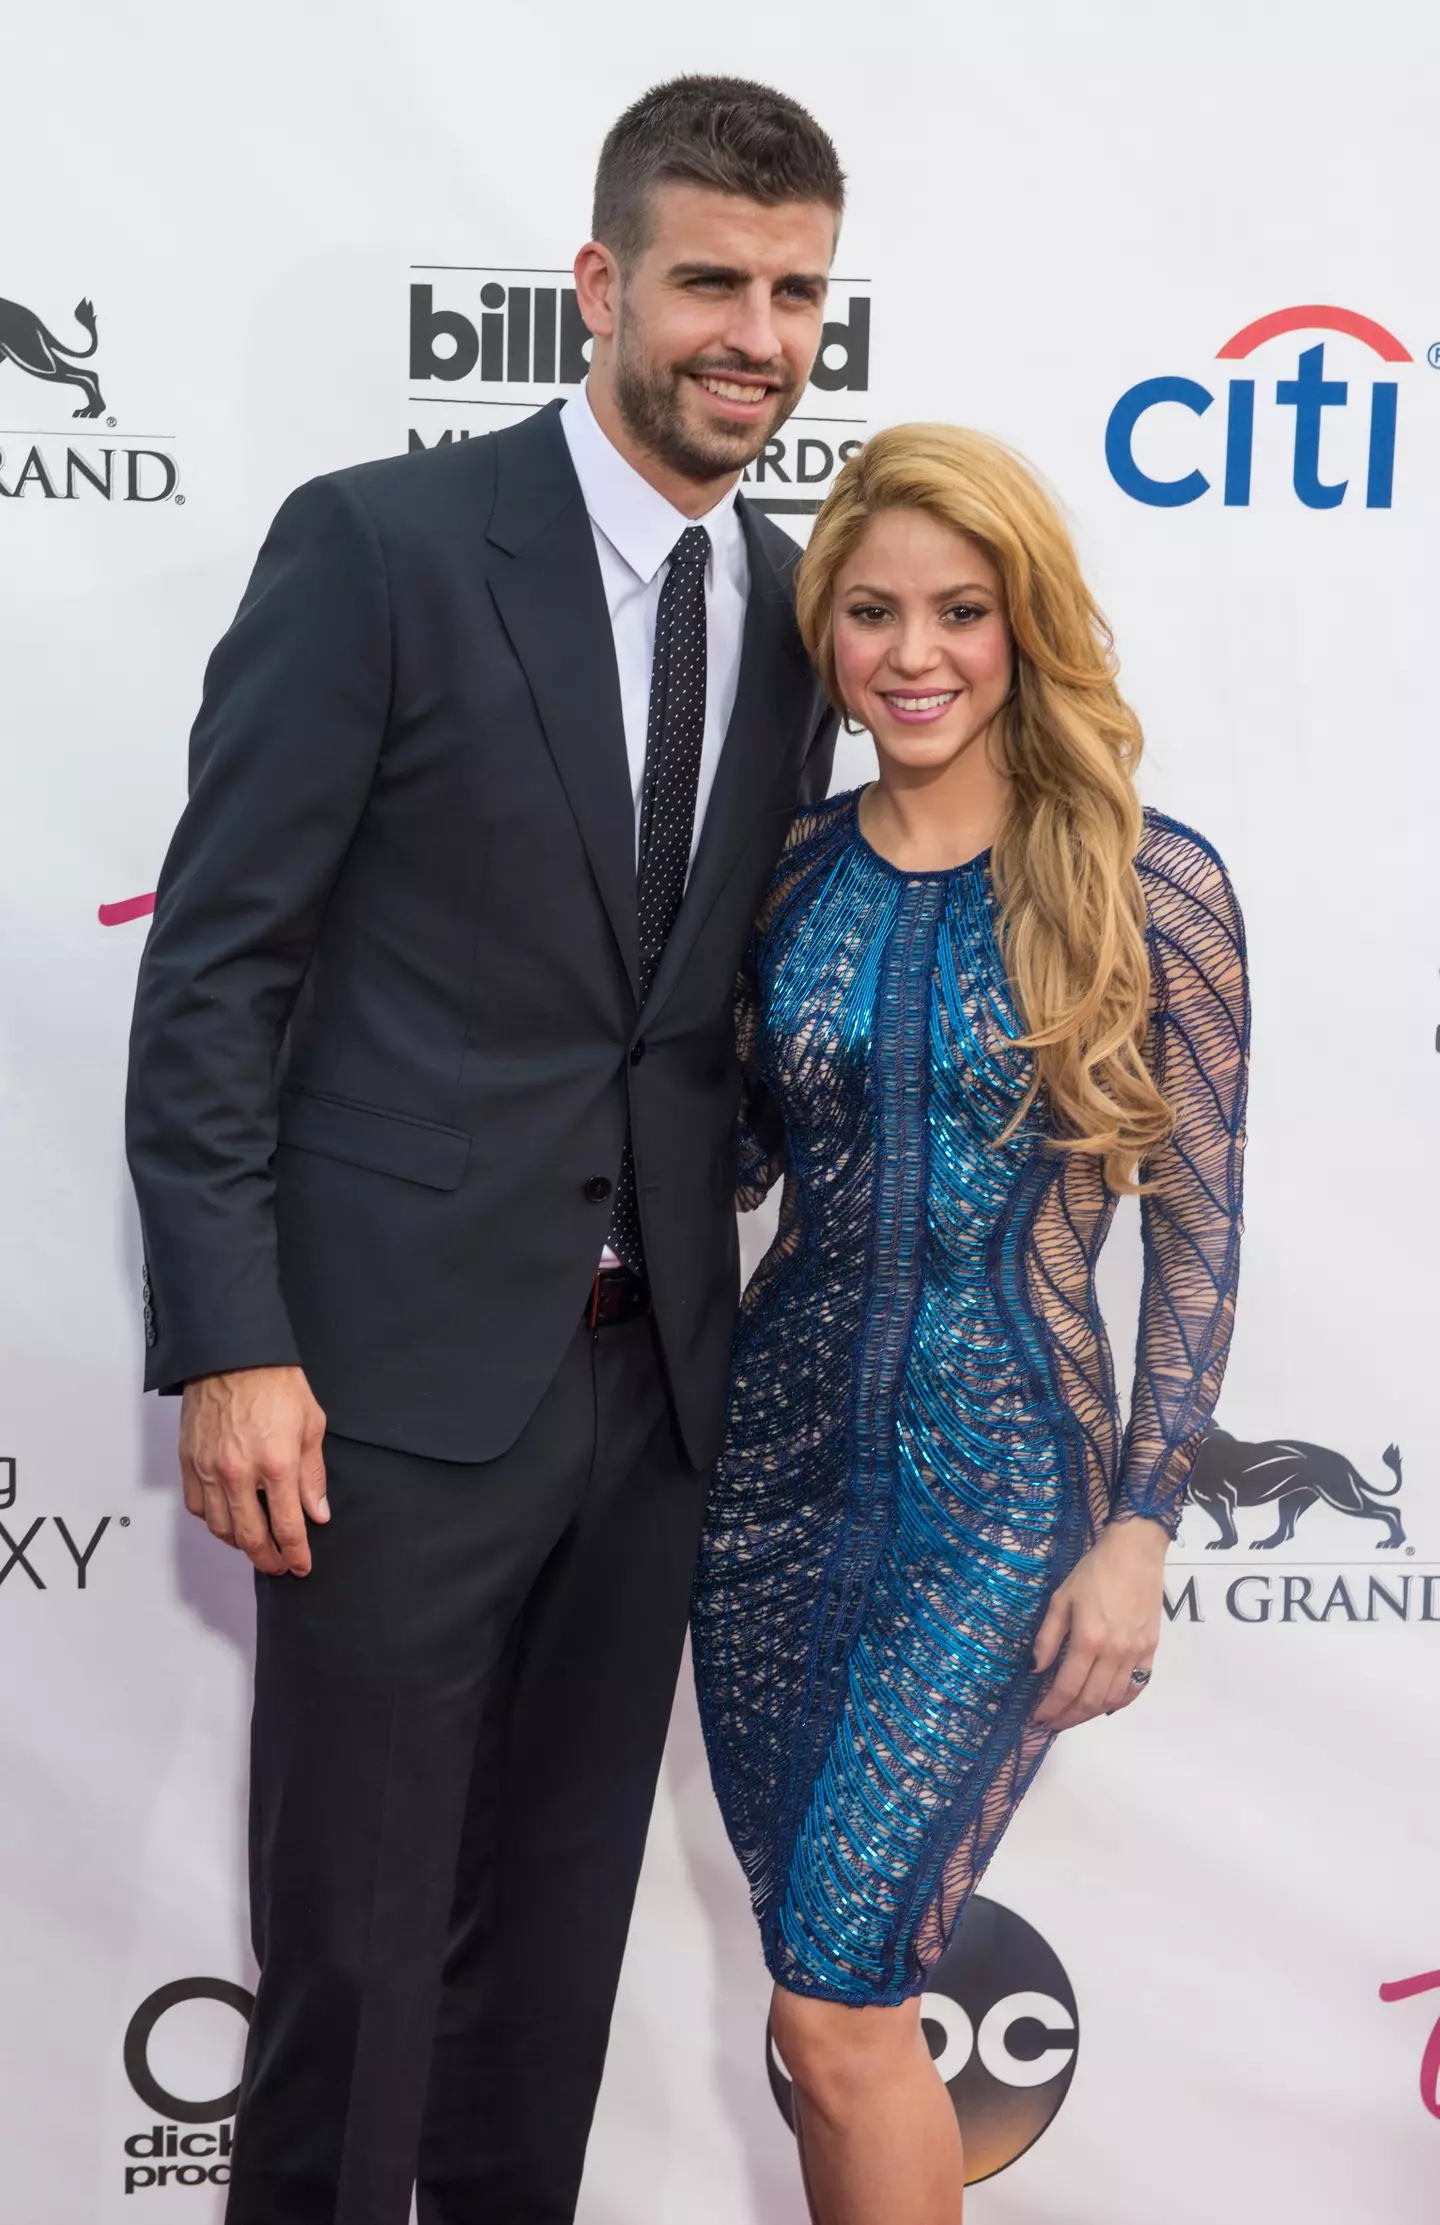 Shakira and Gerard Piqué has split after 11 years.